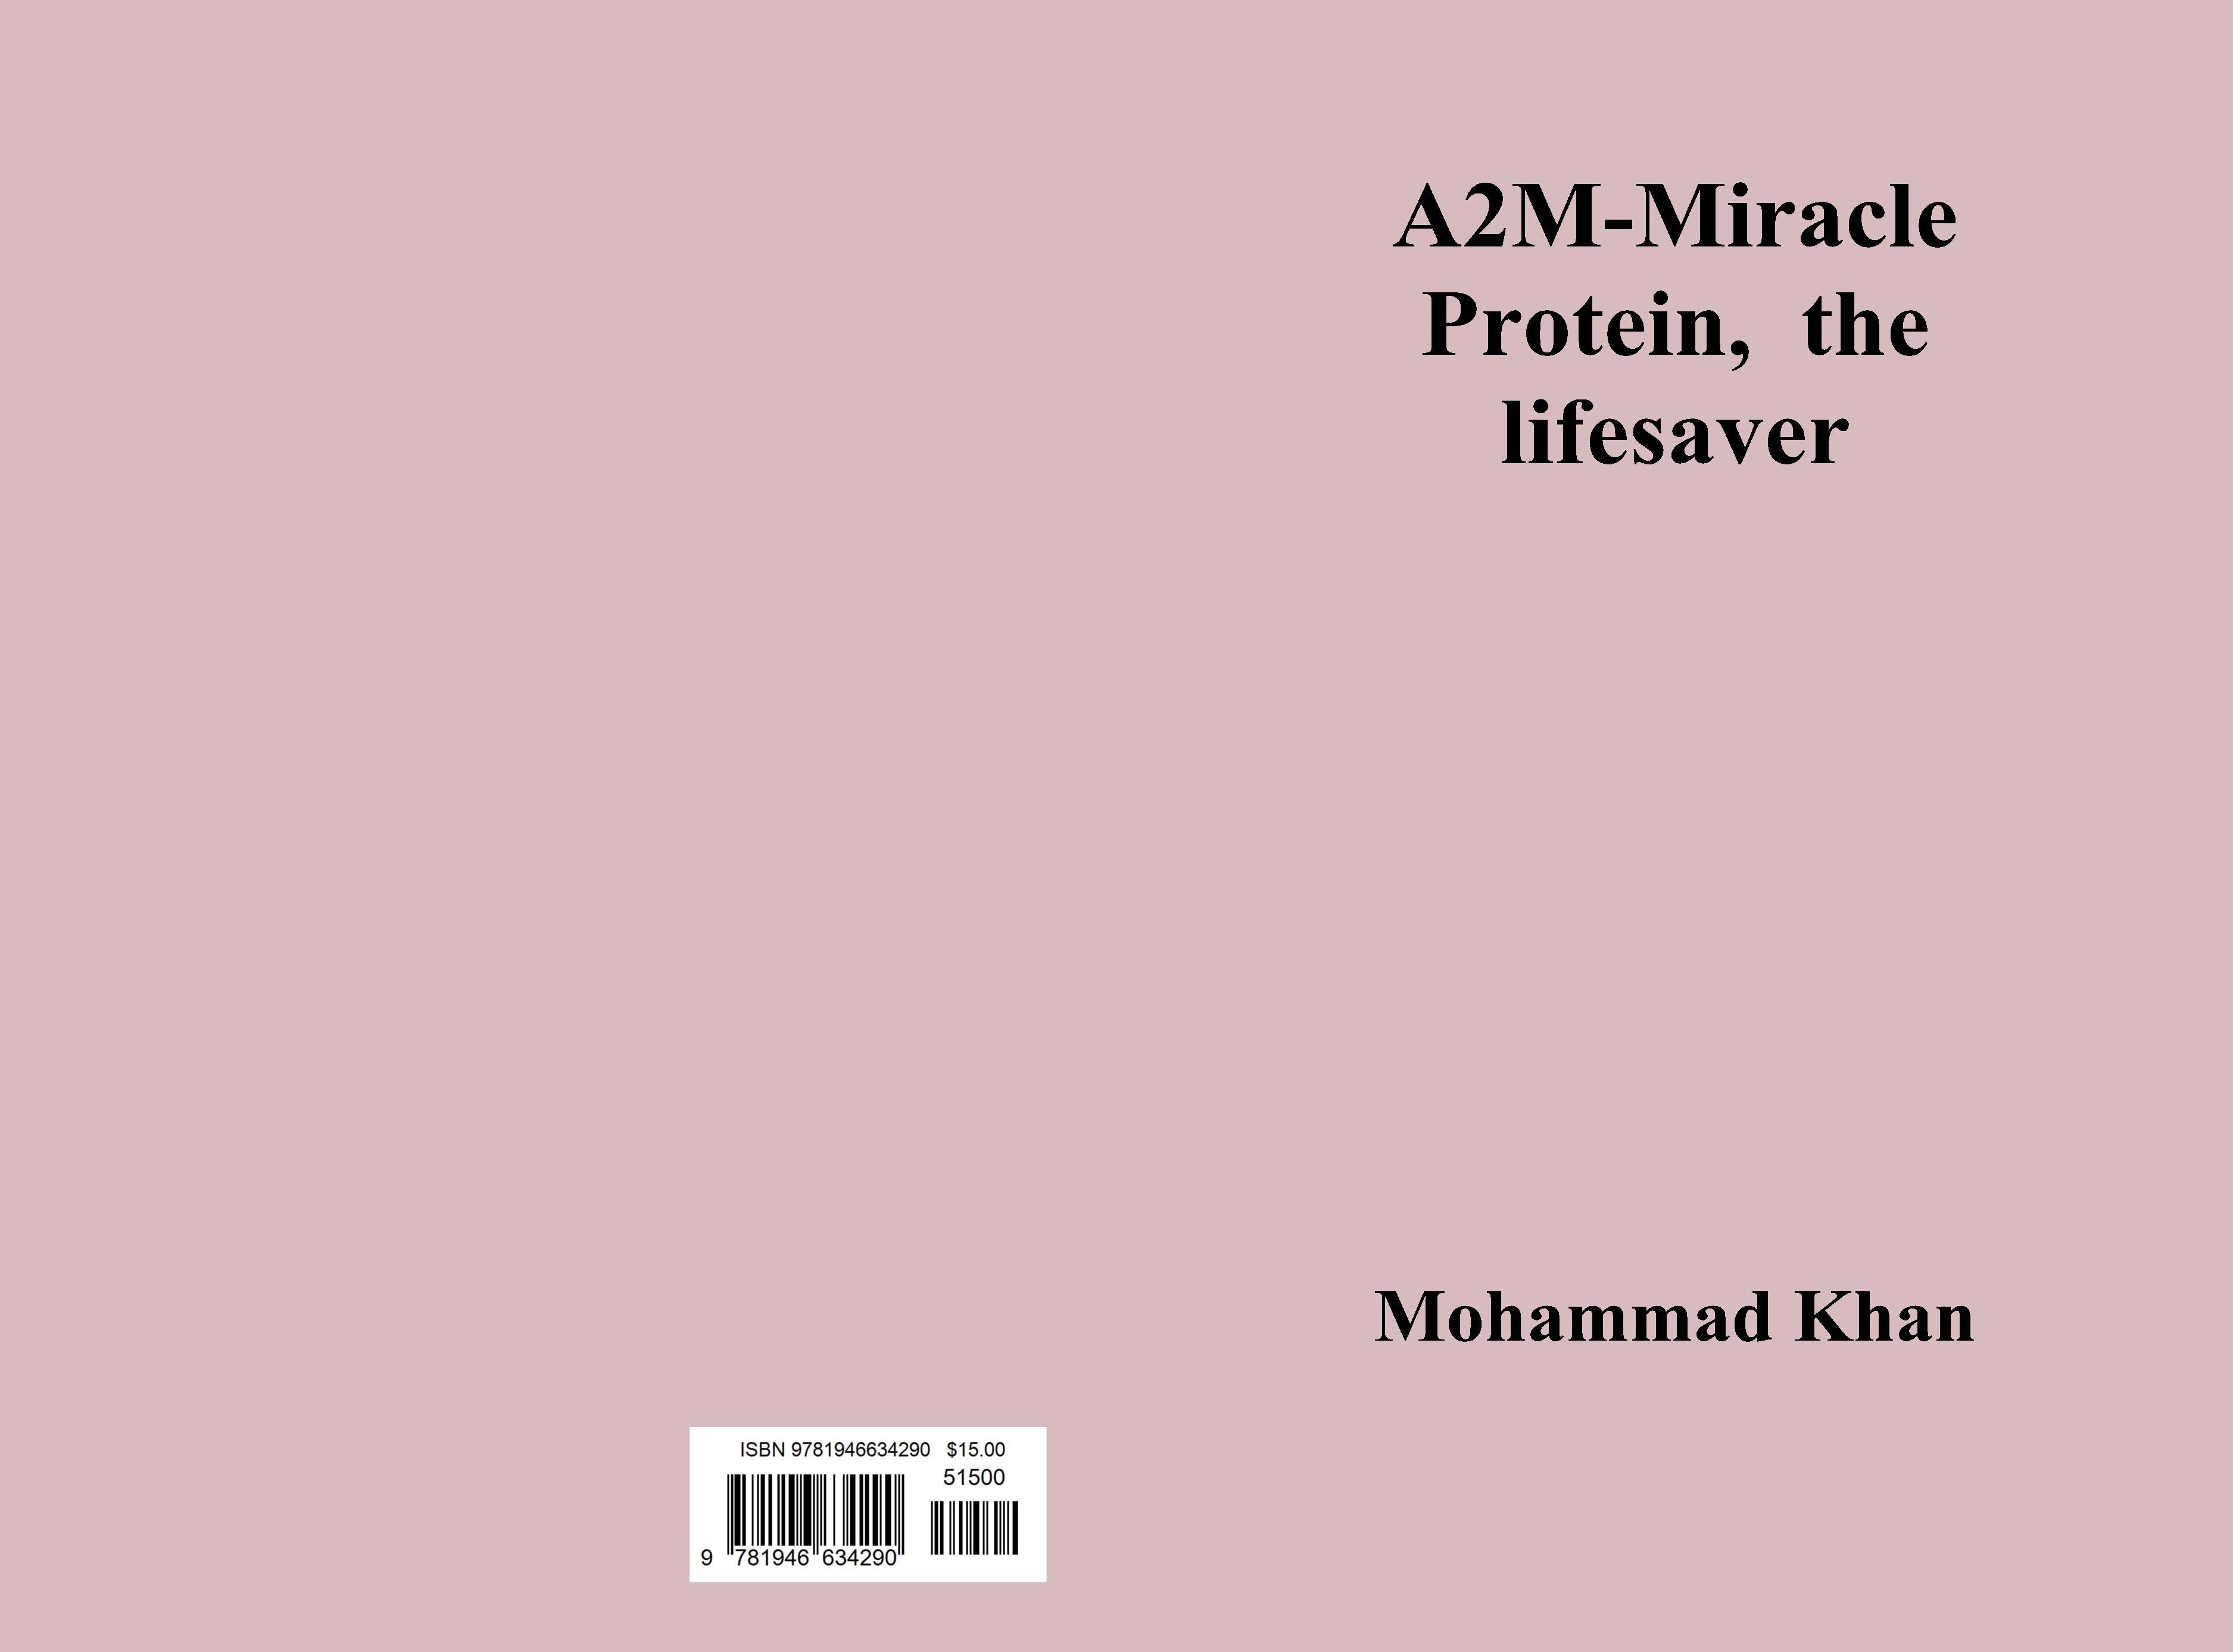 A2M-Miracle Protein, the lifesaver cover image